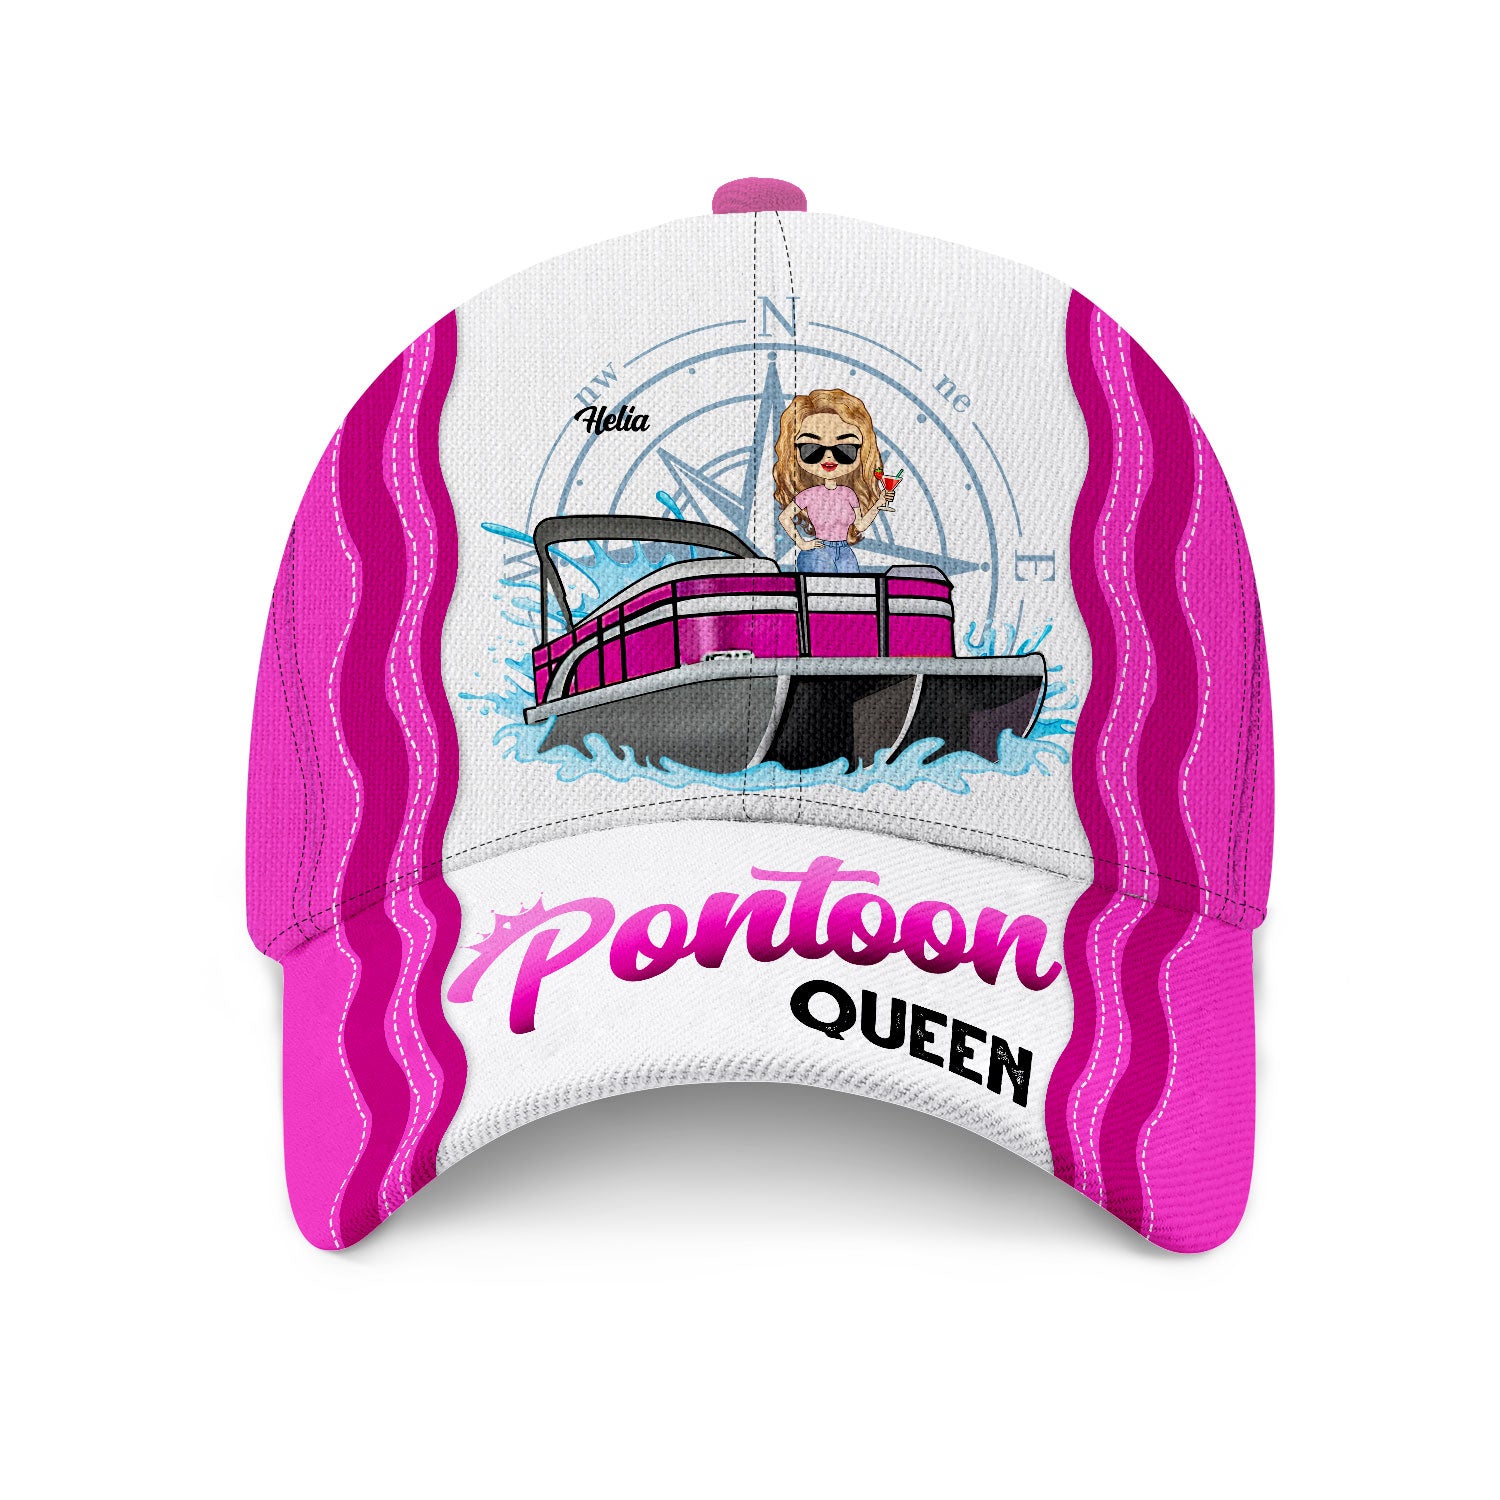 Boating Pontoon Queen Tritoon Queen - Gift For Pontooning Lovers, Lake Lovers, Travelers - Personalized Classic Cap